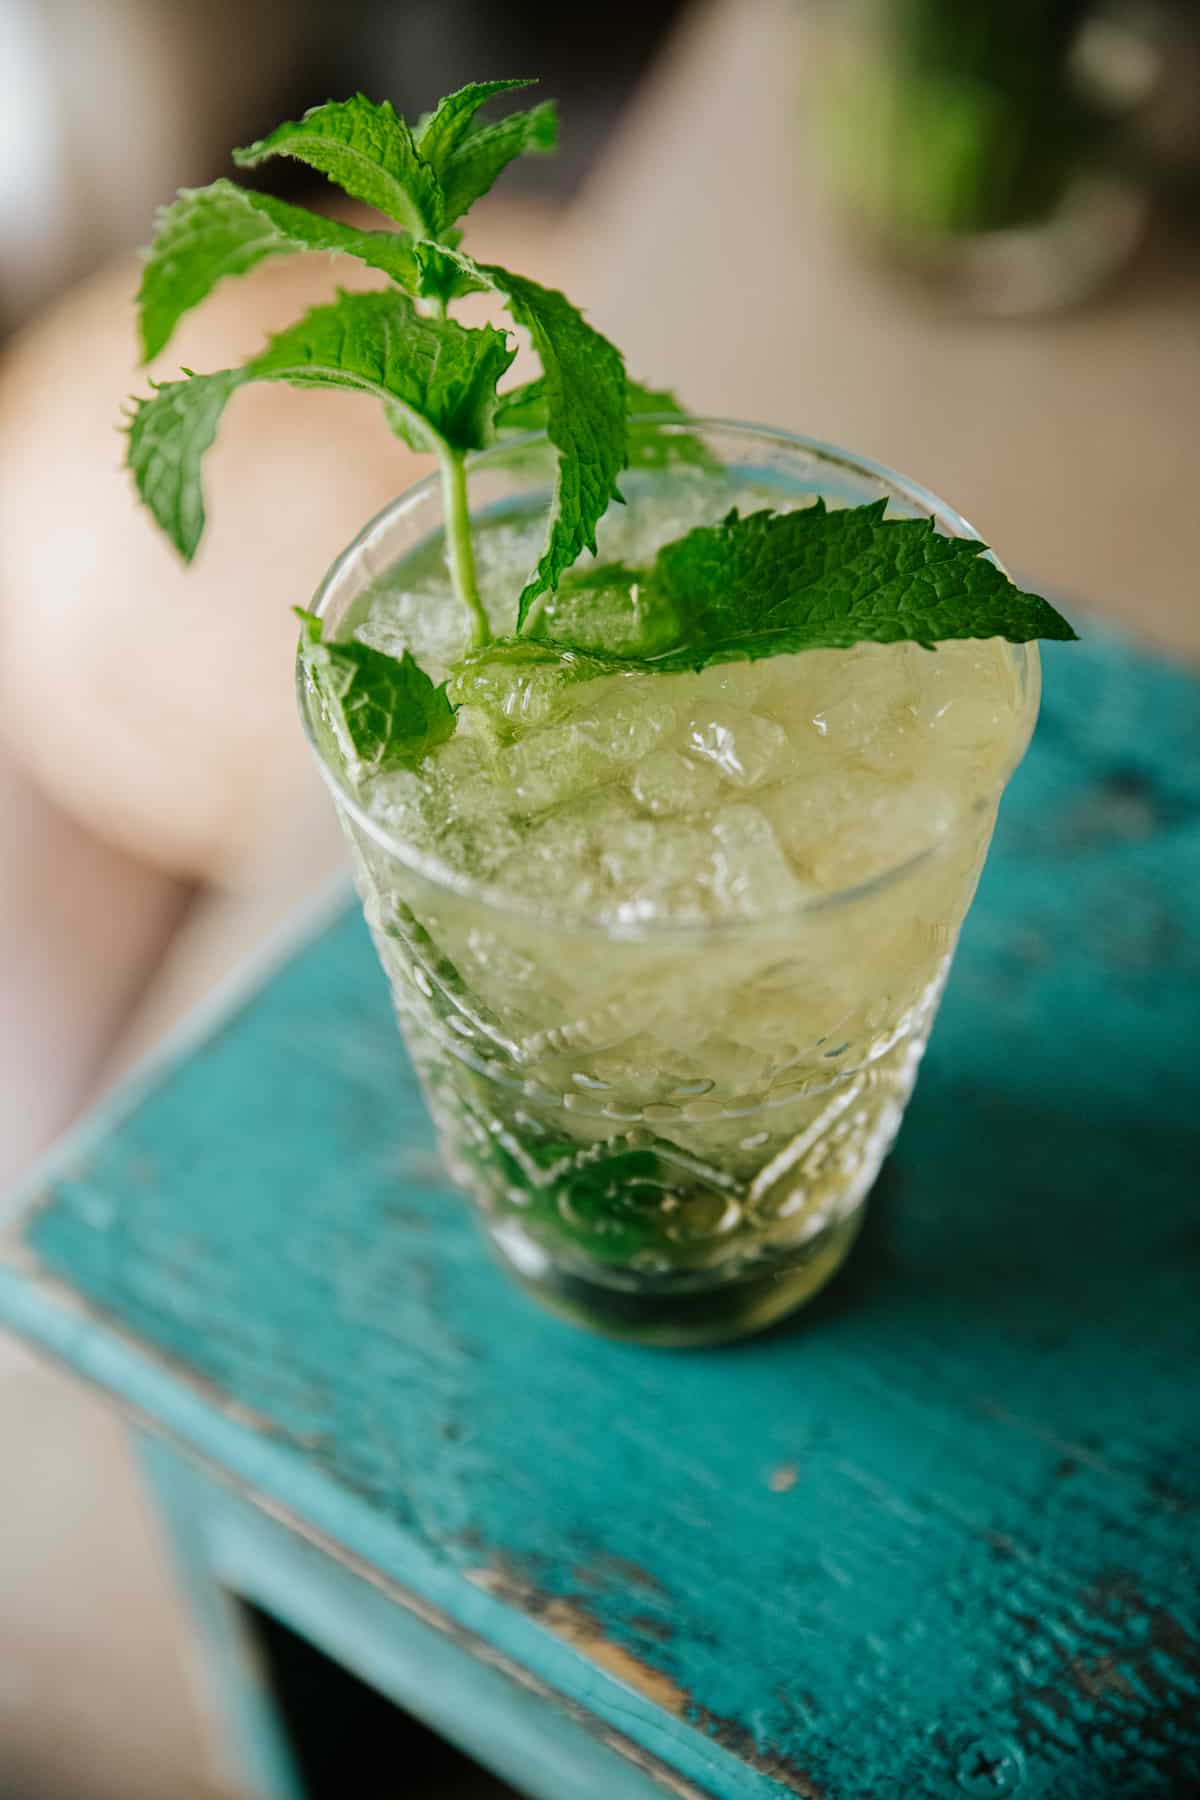 45 degree angle shot of classic mint julep in a clear glass cup with pellet style ice. 